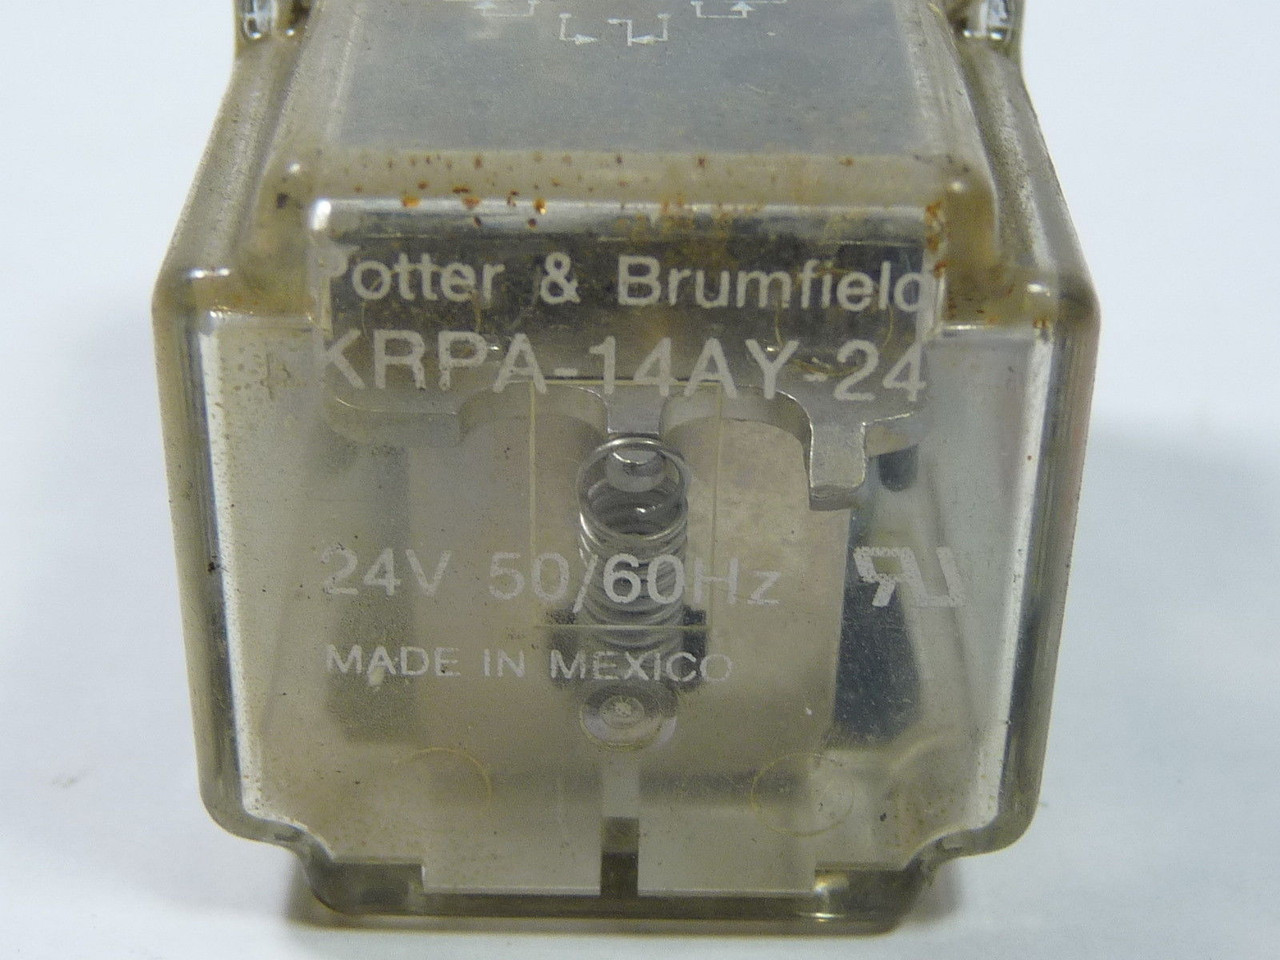 Potter & Brumfield KRPA-14AY-24 Power Relay 24V 50/60Hz Coil 5A 120VAC USED